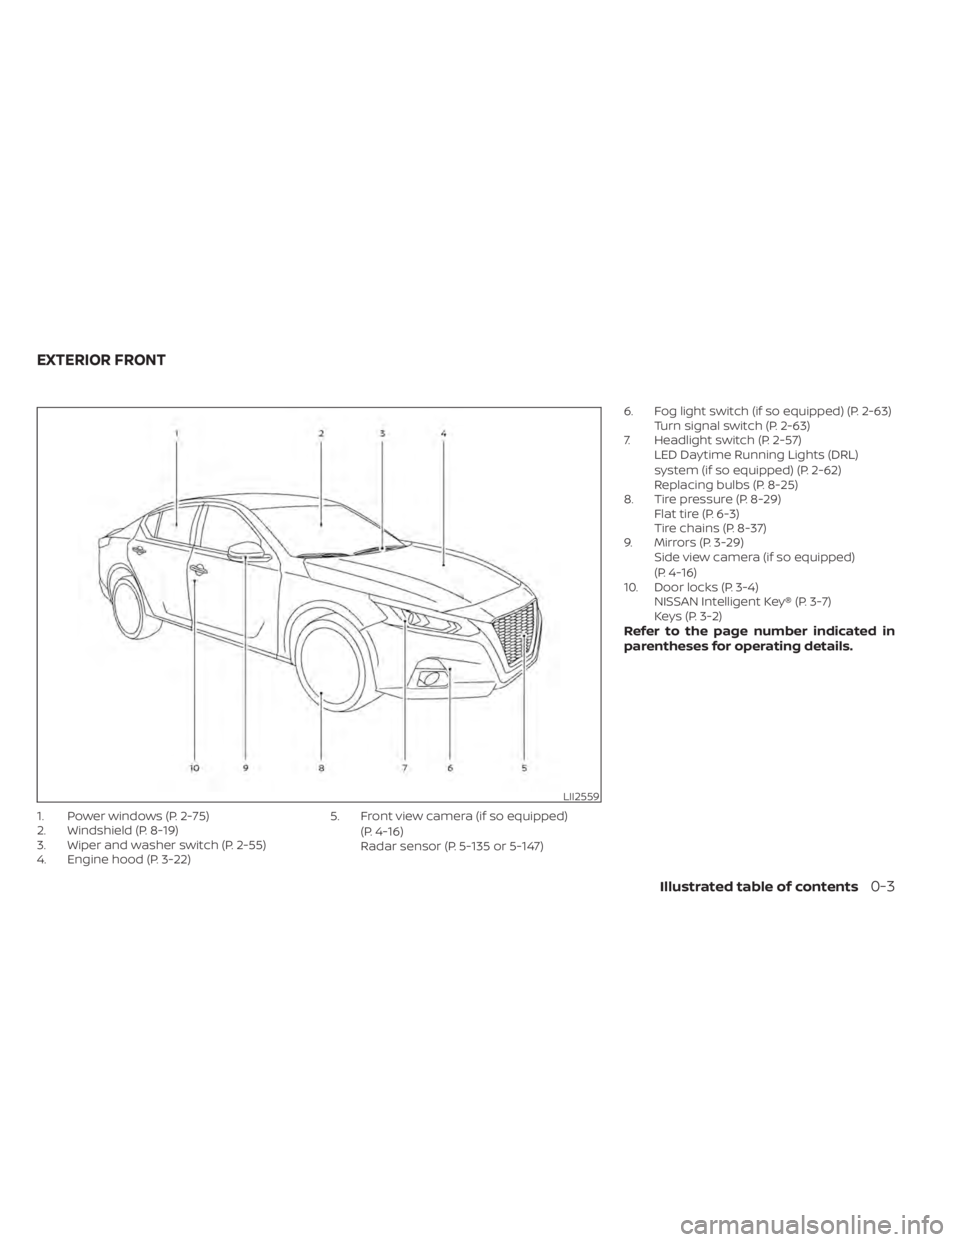 NISSAN ALTIMA 2023  Owners Manual 1. Power windows (P. 2-75)
2. Windshield (P. 8-19)
3. Wiper and washer switch (P. 2-55)
4. Engine hood (P. 3-22)5. Front view camera (if so equipped)
(P. 4-16)
Radar sensor (P. 5-135 or 5-147) 6. Fog 